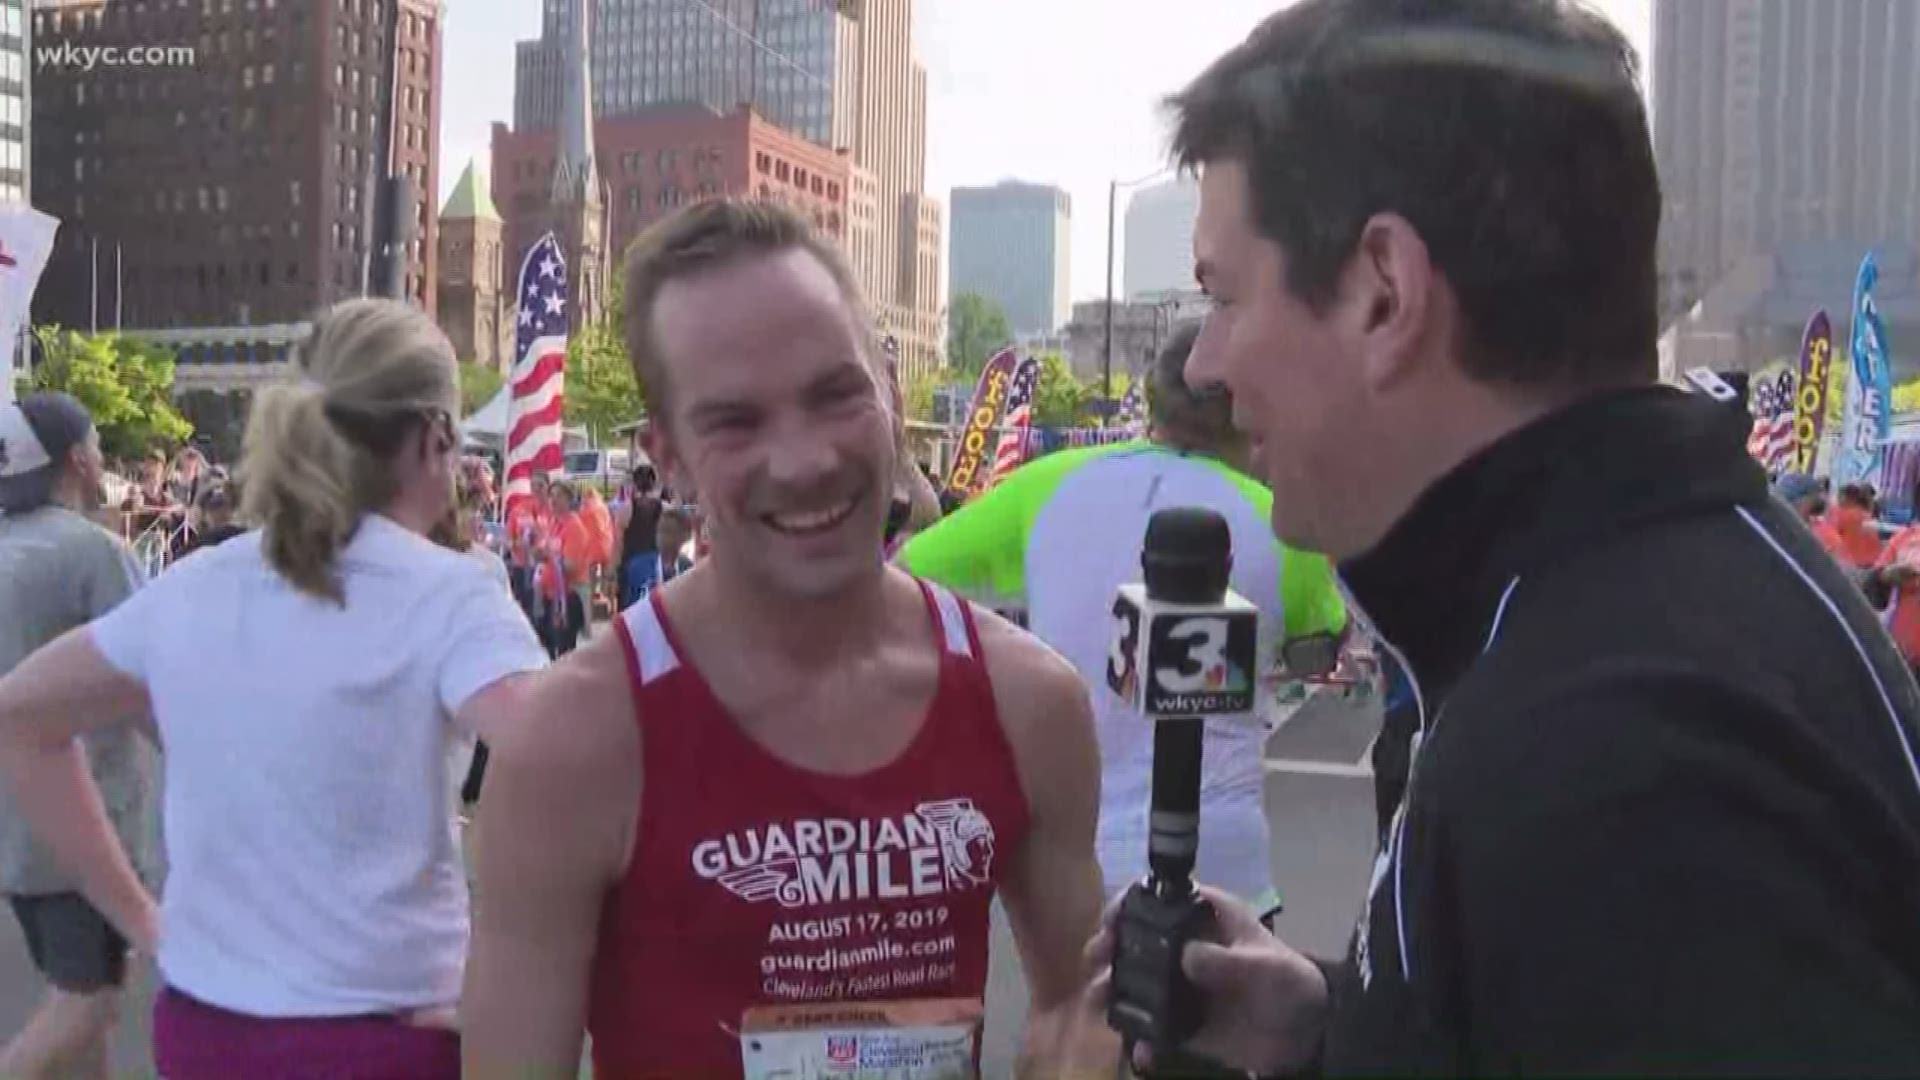 May 19, 2019: We speak with the Cleveland native who won the 2019 half marathon with a finish time of one hour 10 minutes.